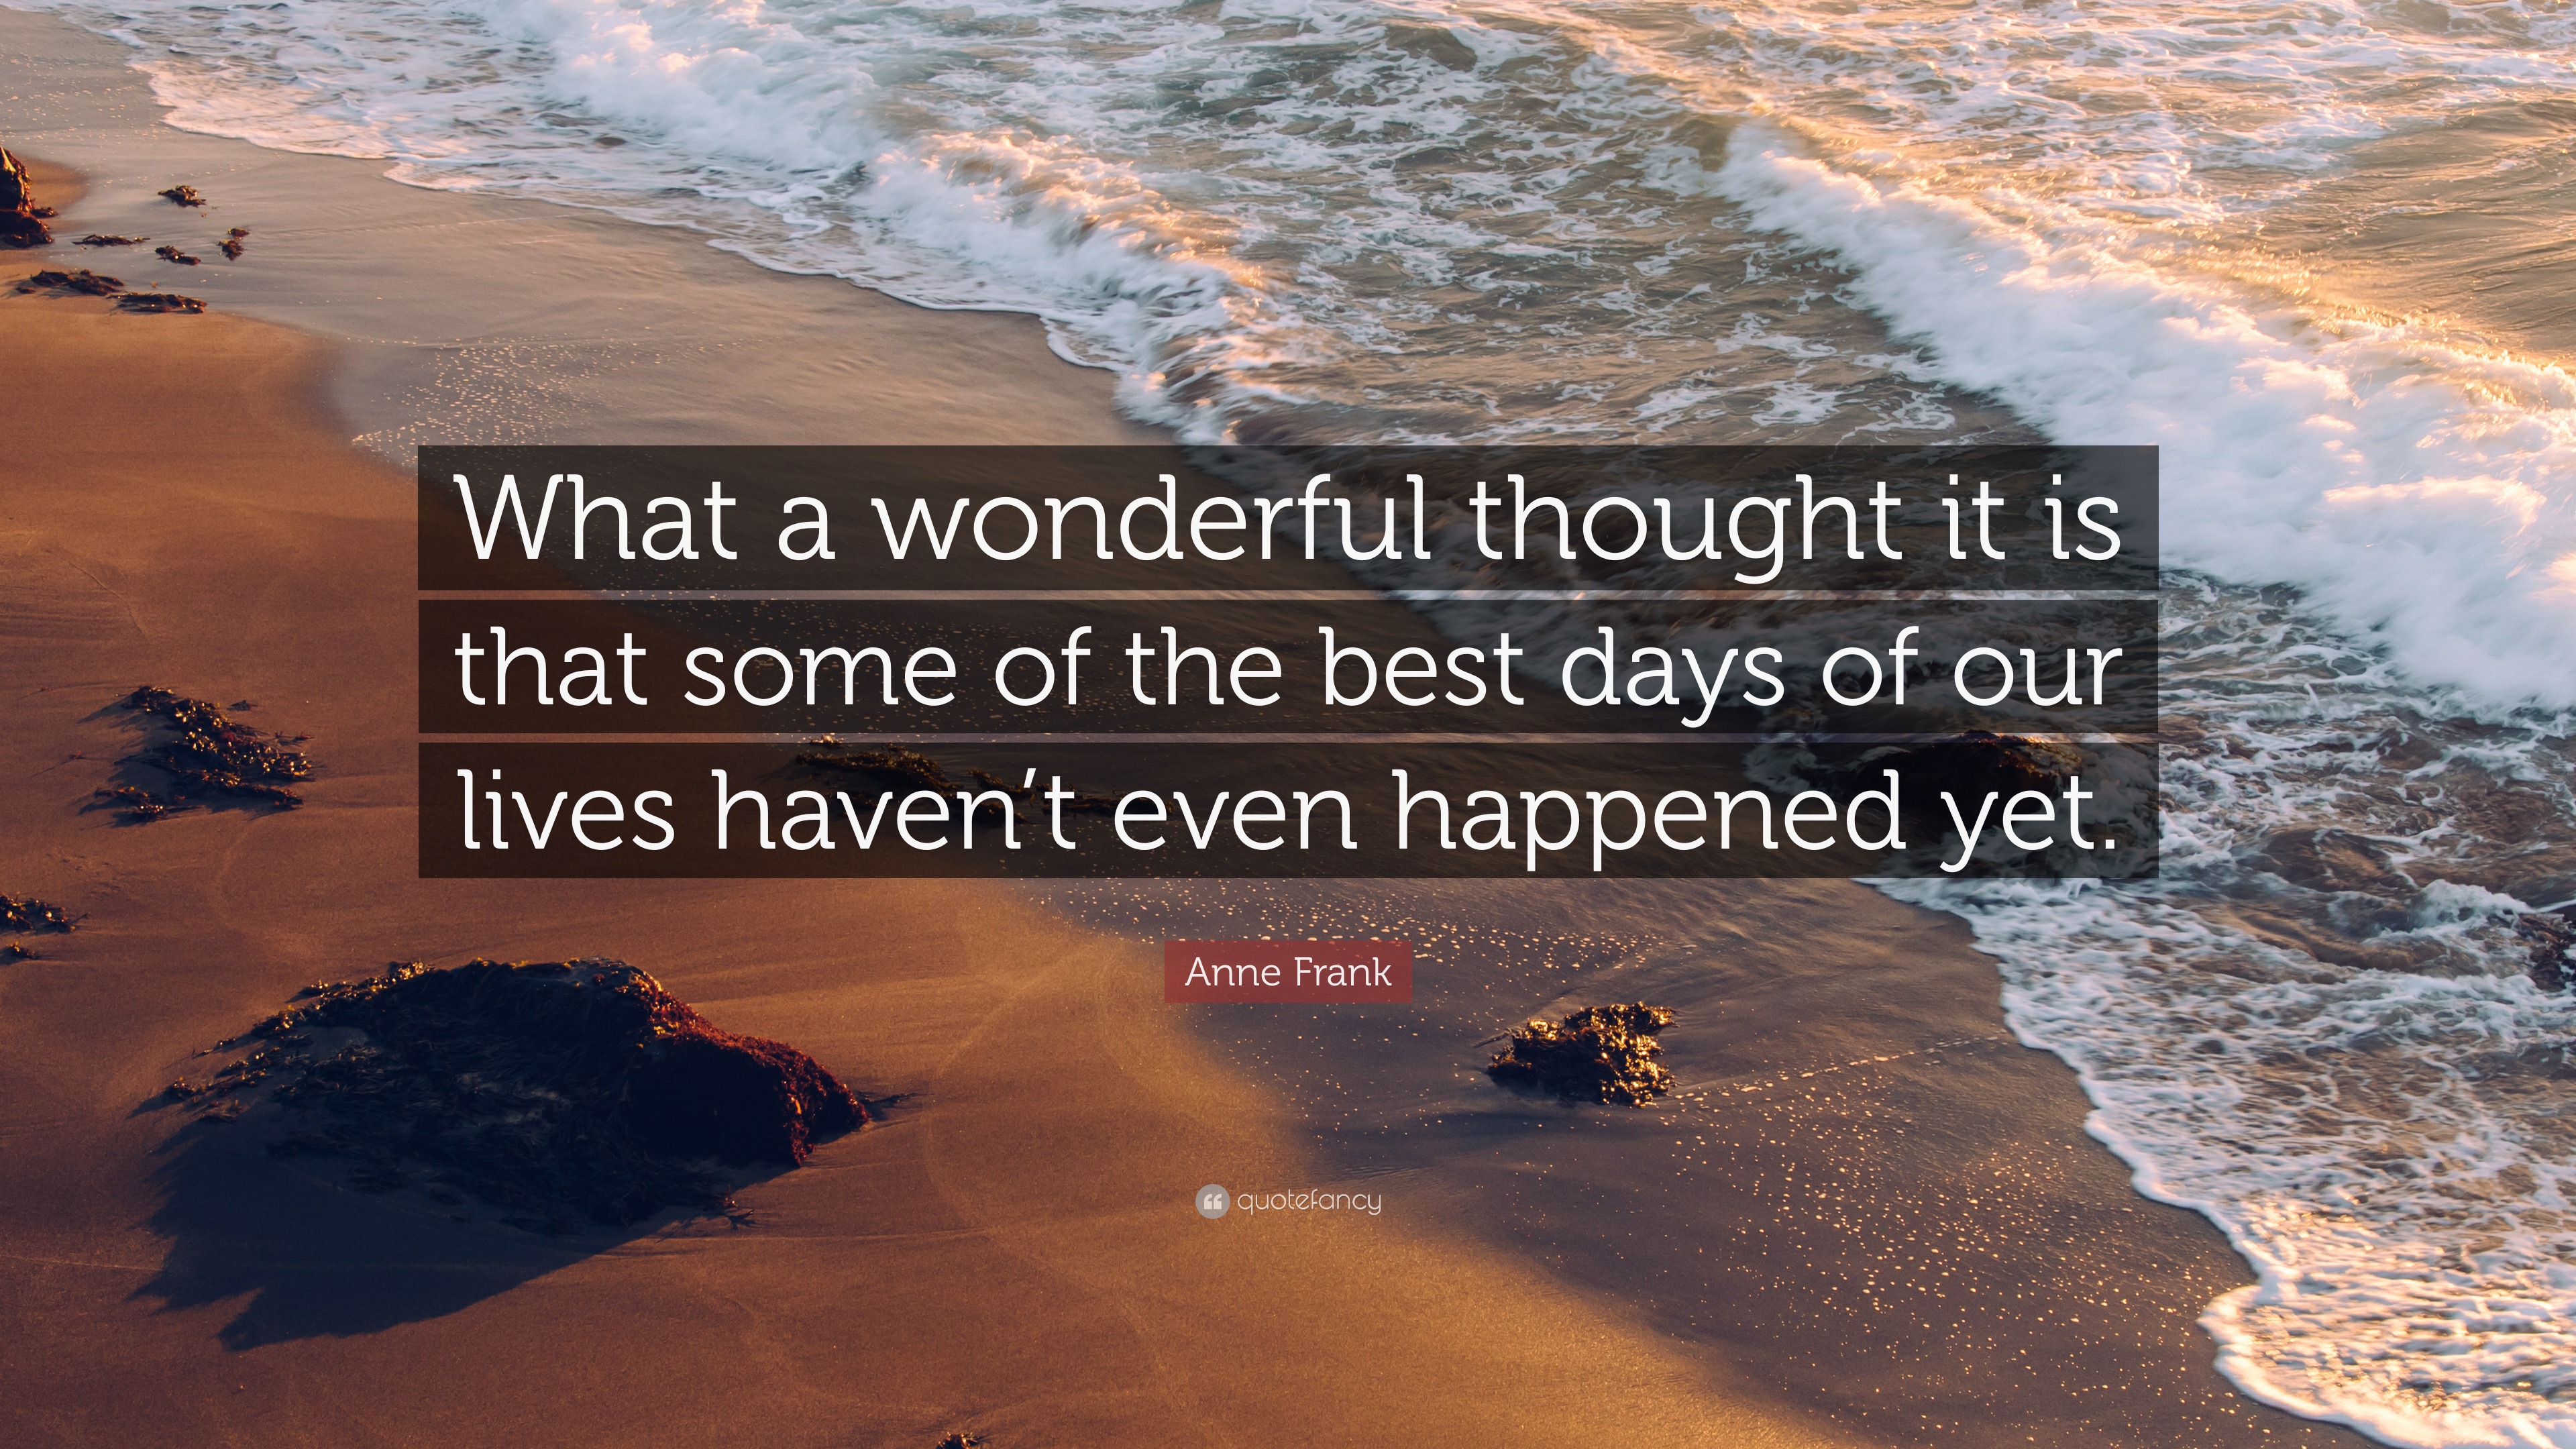 Anne Frank Quote: “What a wonderful thought it is that some of the best ...